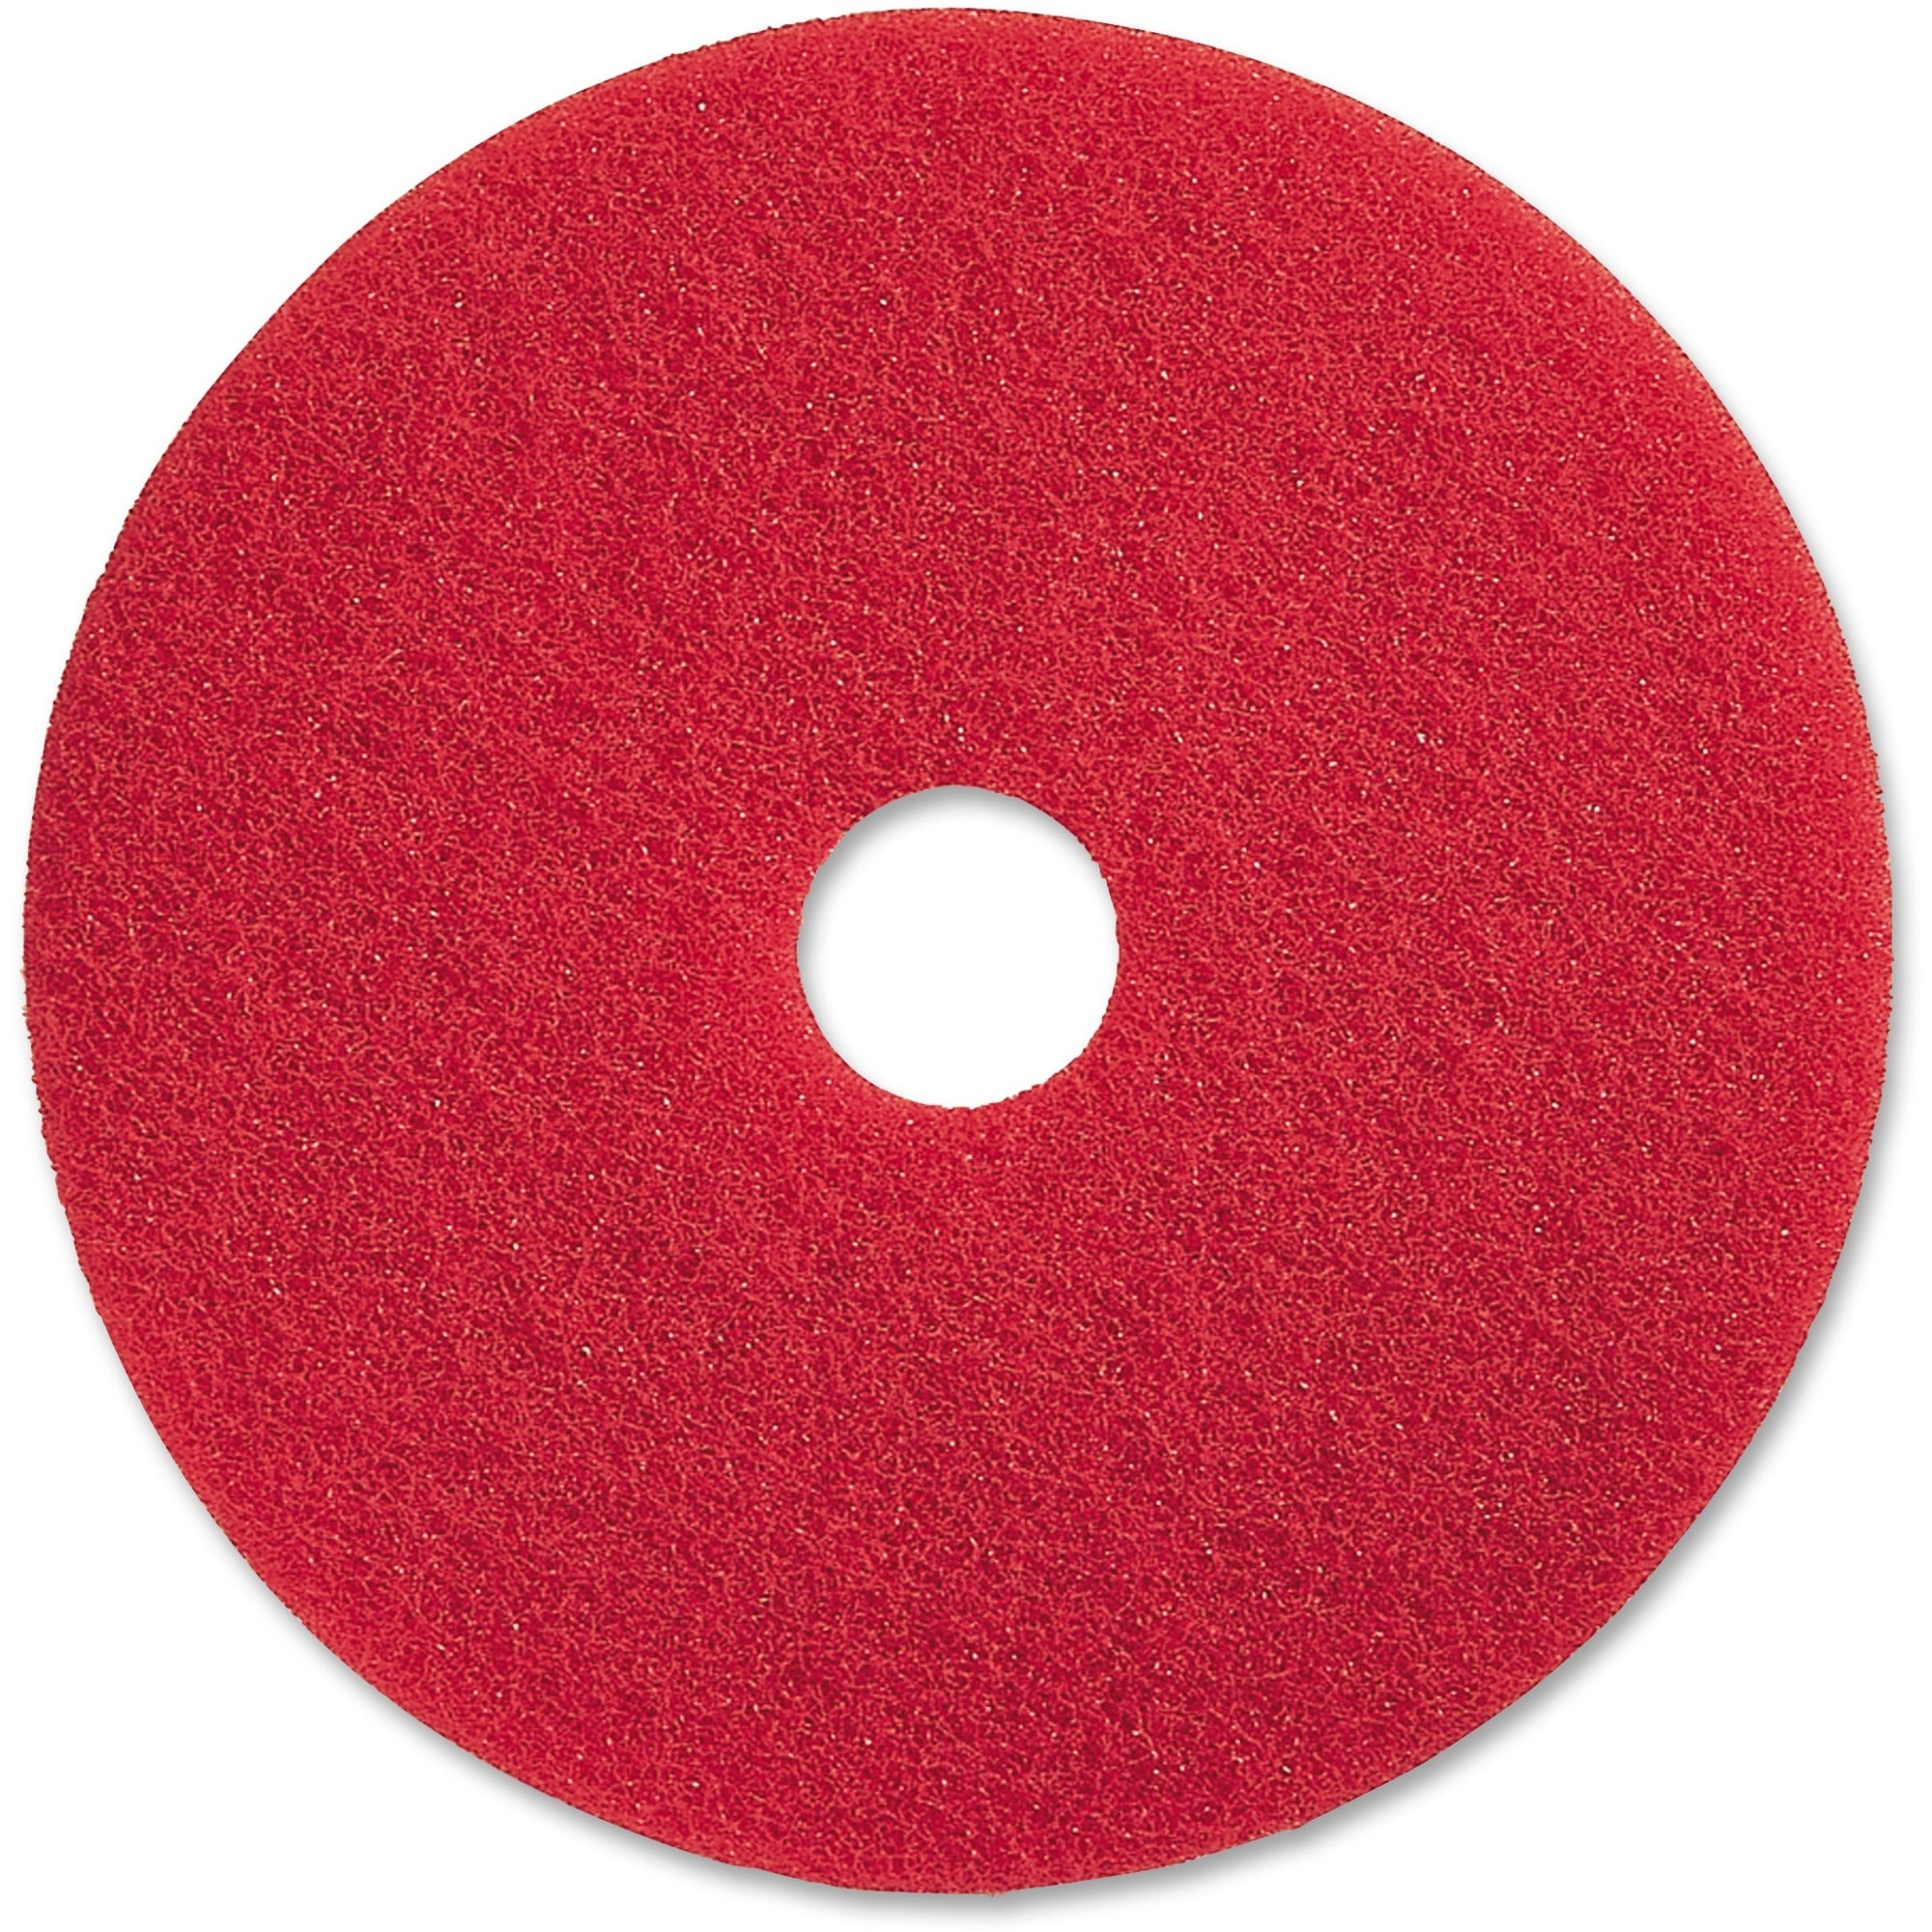 Genuine Joe Red Buffing Floor Pad - 13" Diameter - 5/Carton x 13" Diameter x 1" Thickness - Buffing, Scrubbing, Floor - 175 rpm to 350 rpm Speed Supported - Flexible, Resilient, Dirt Remover, Rotate - Fiber - Red - 